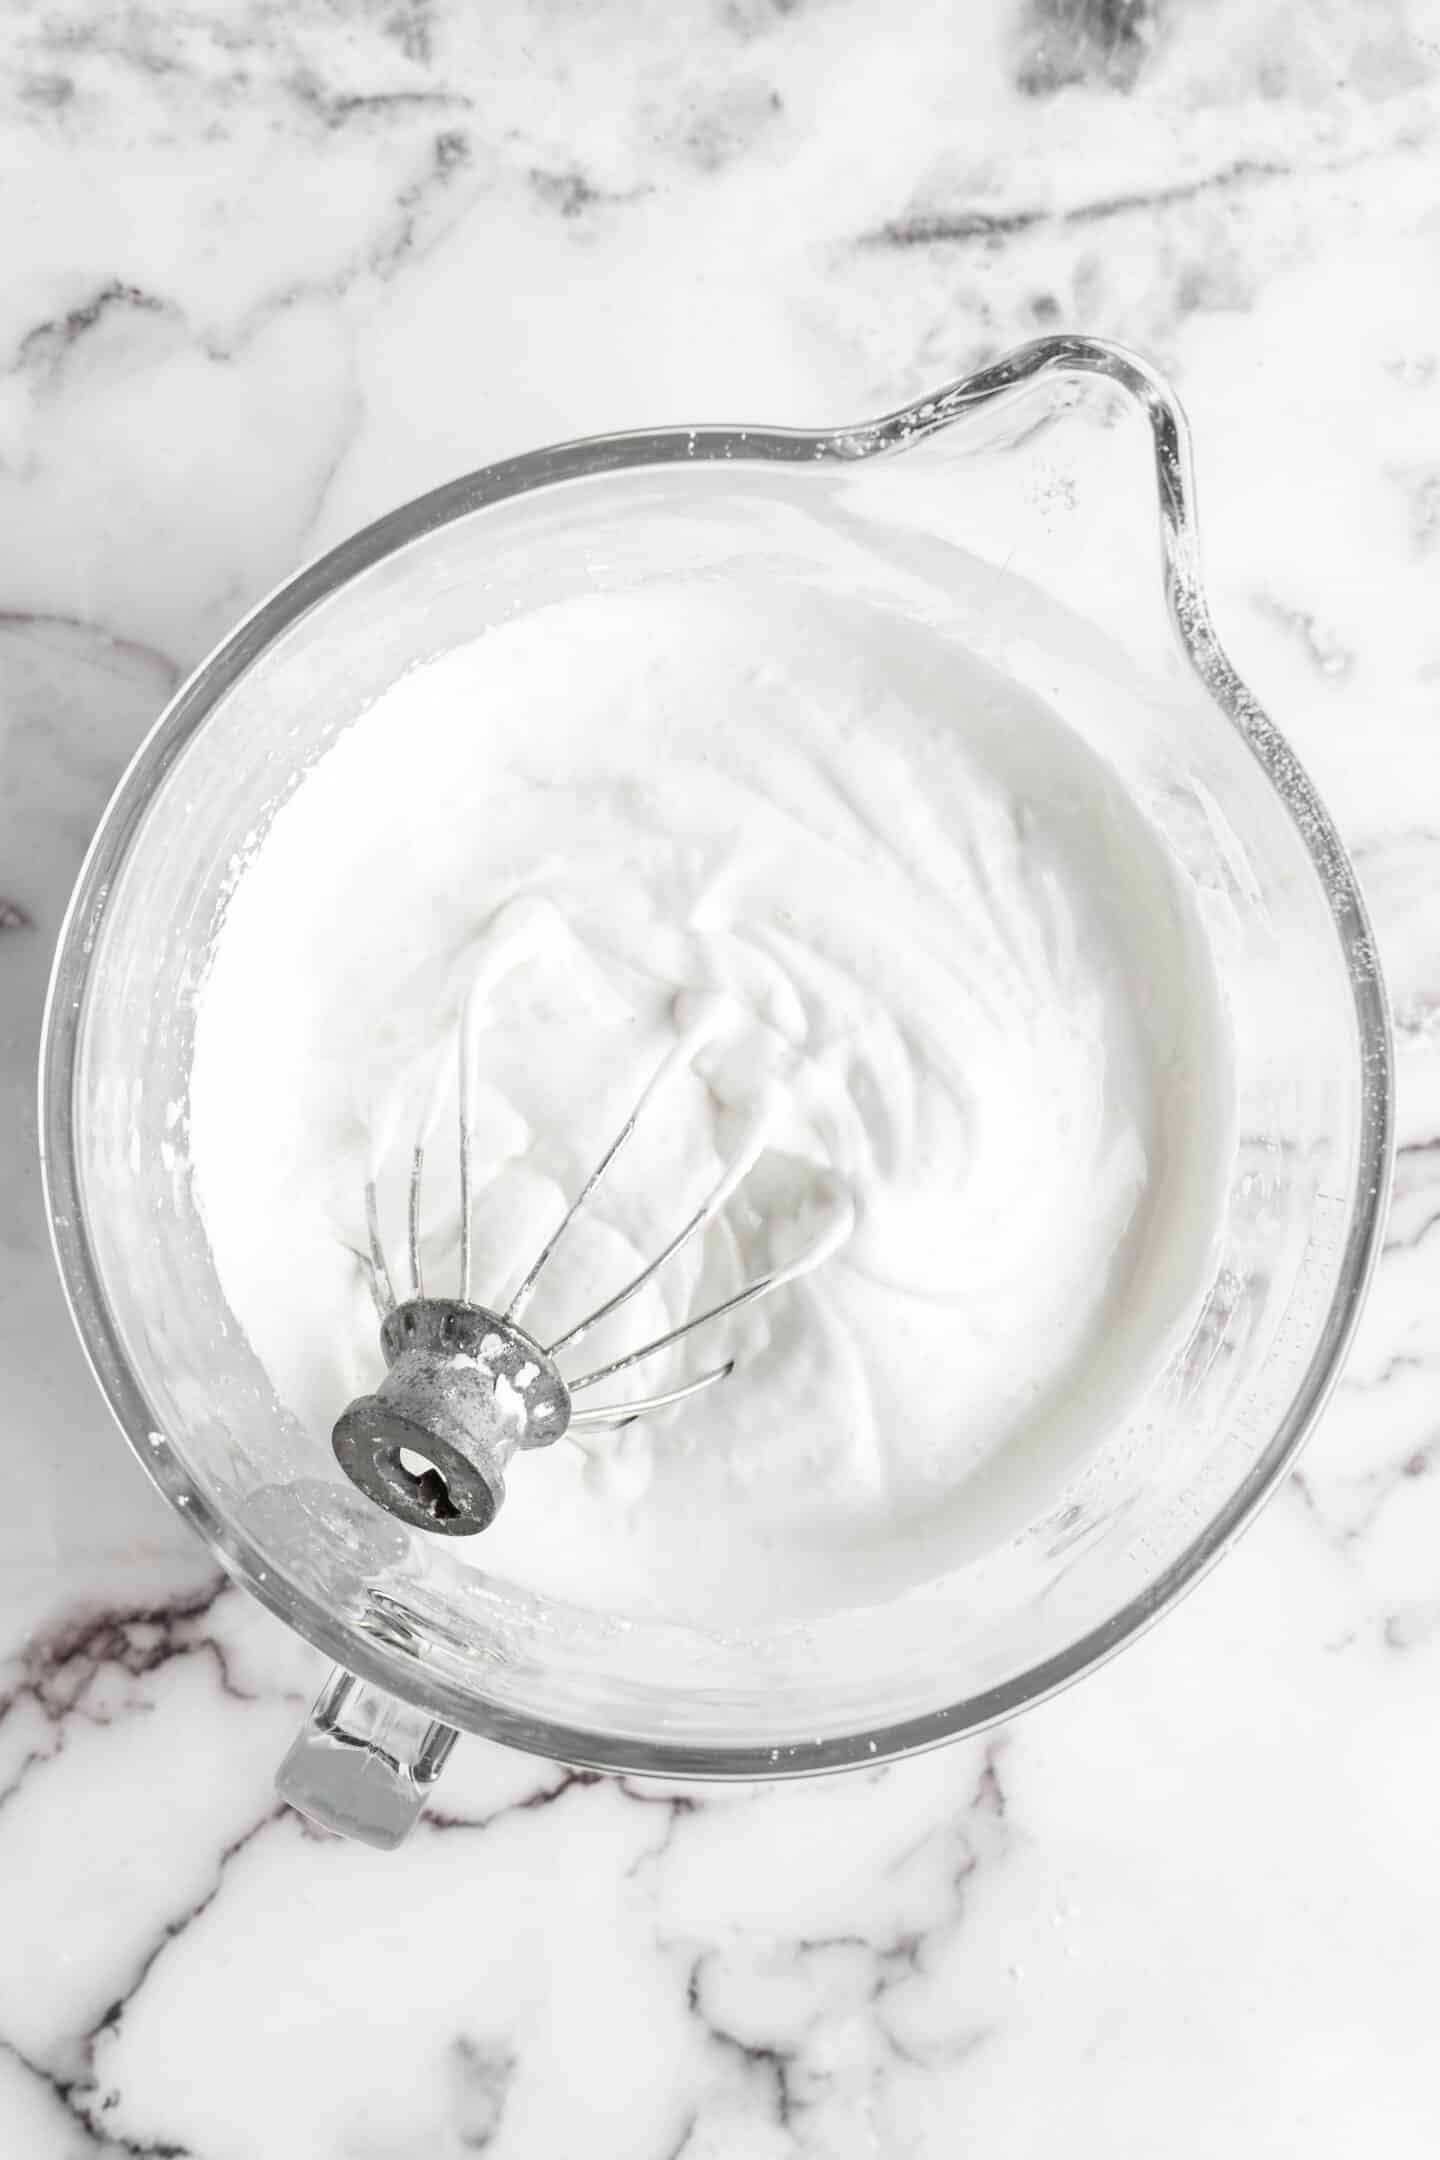 whipped aquafaba in a glass bowl with a wire whip in it